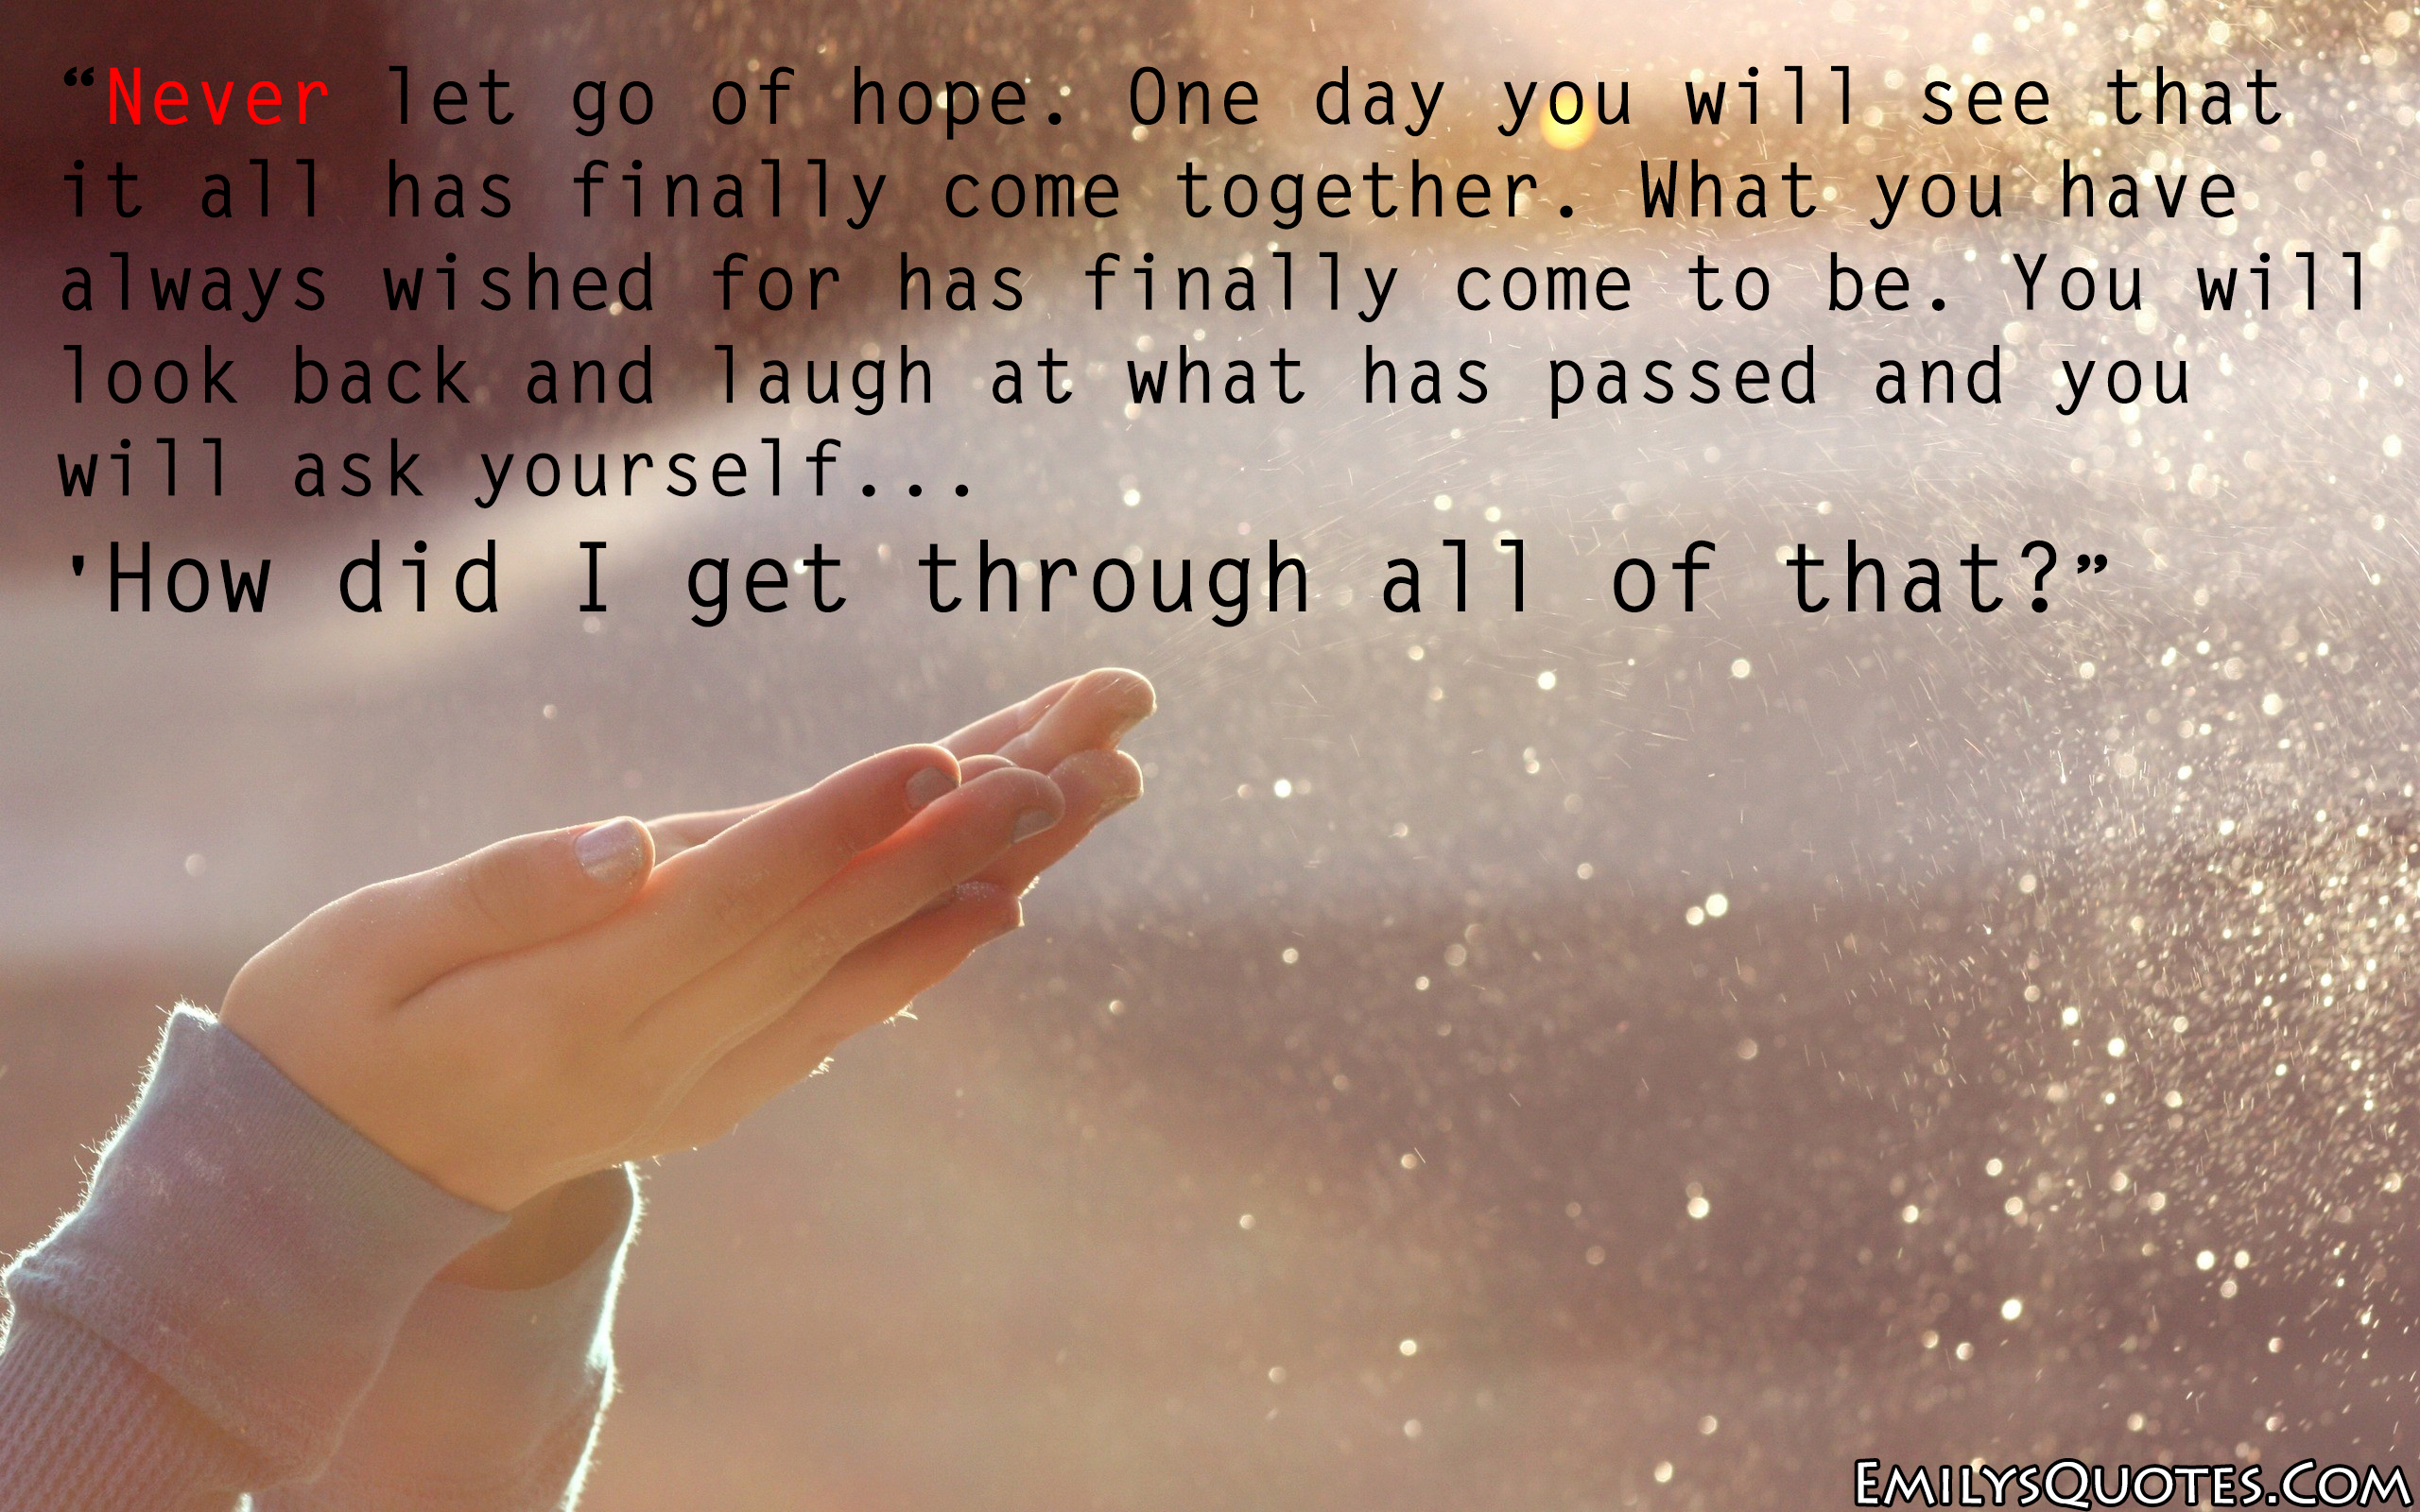 Quotes About Hope. QuotesGram